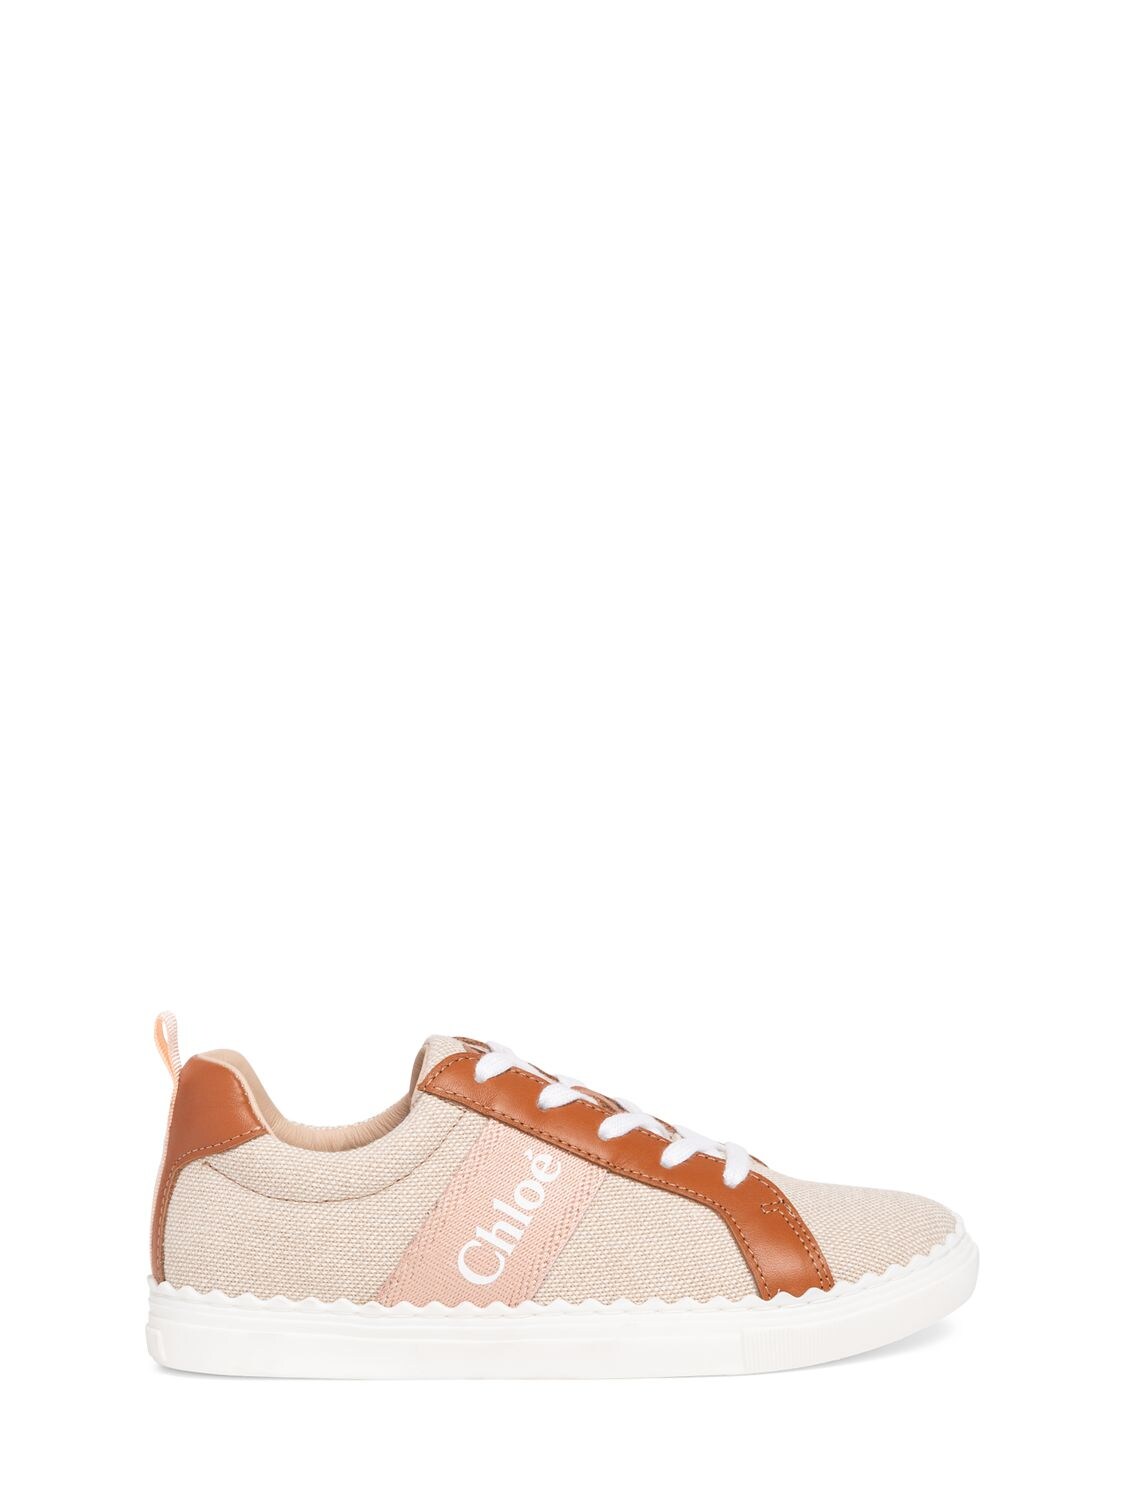 Chloé Kids' Leather & Cotton Lace-up Sneakers In Neutral